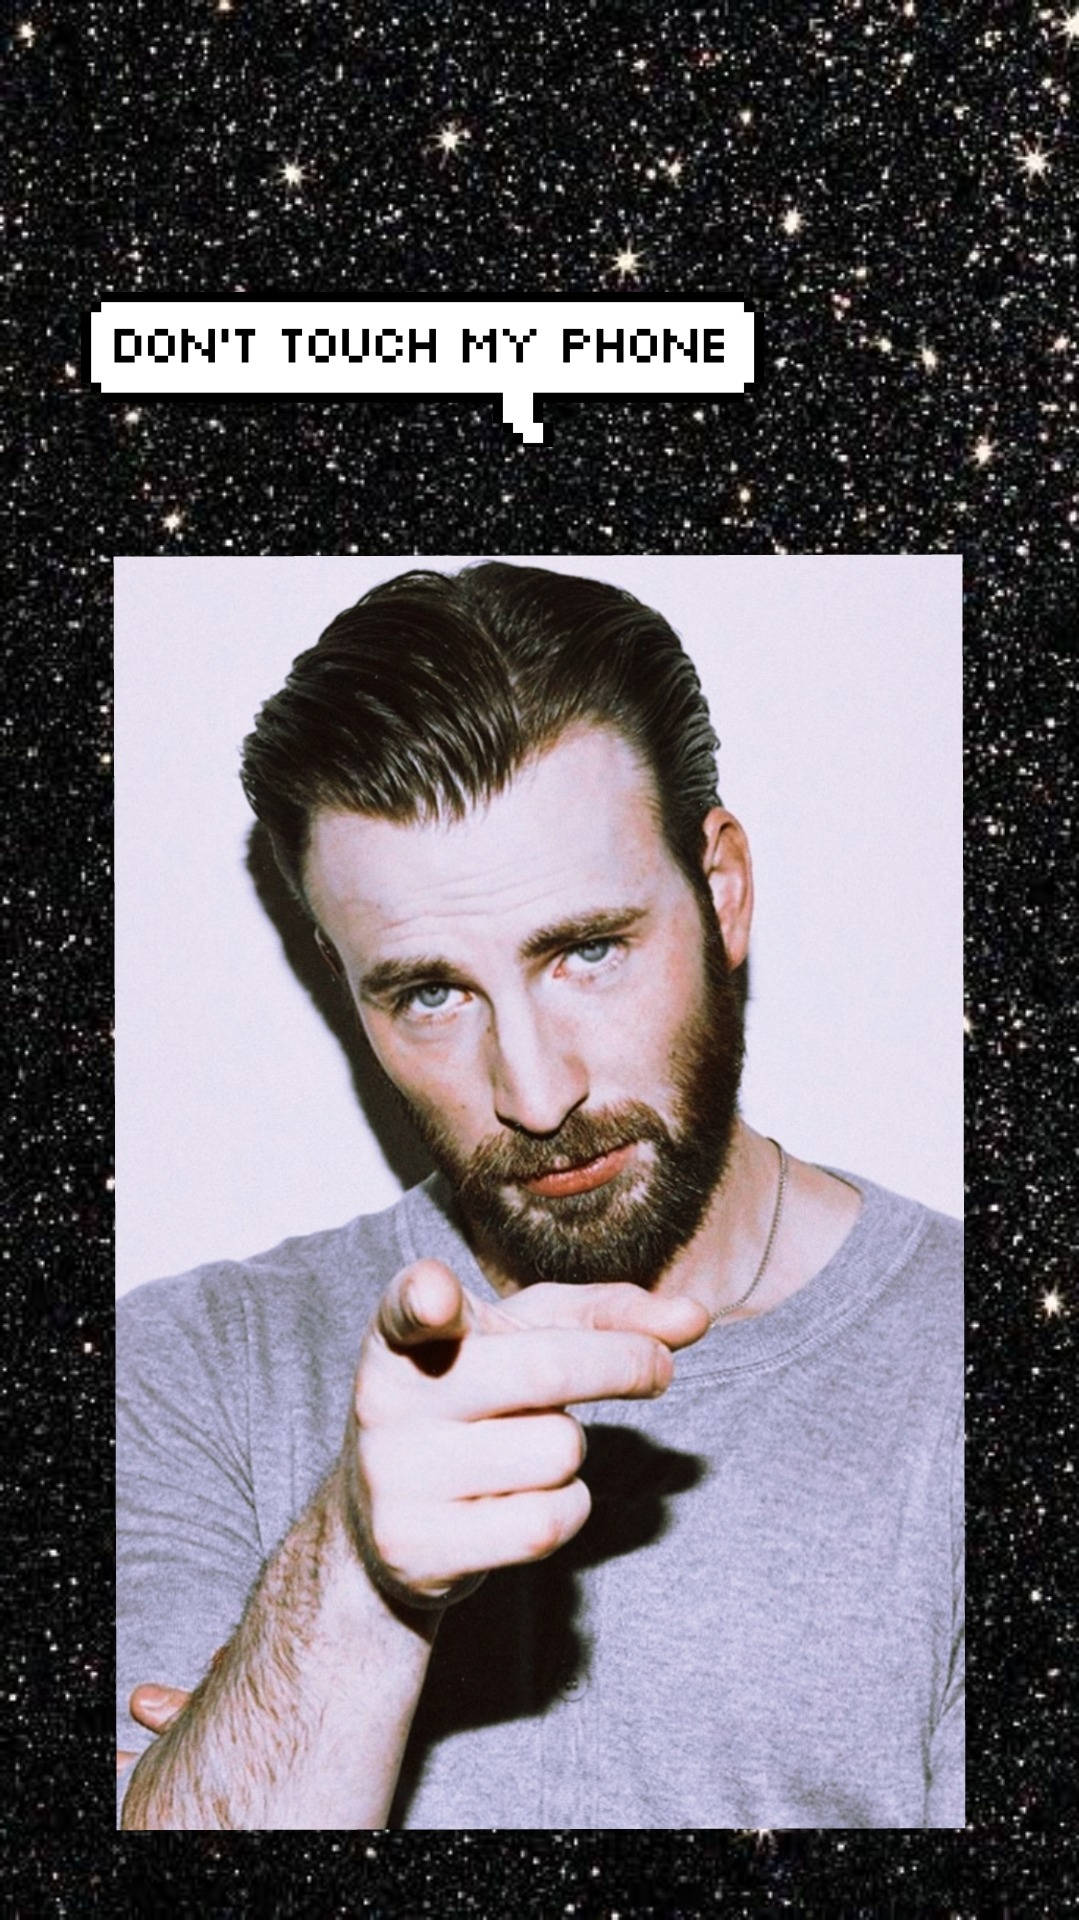 Chris Evans Don't Touch My Phone Wallpaper